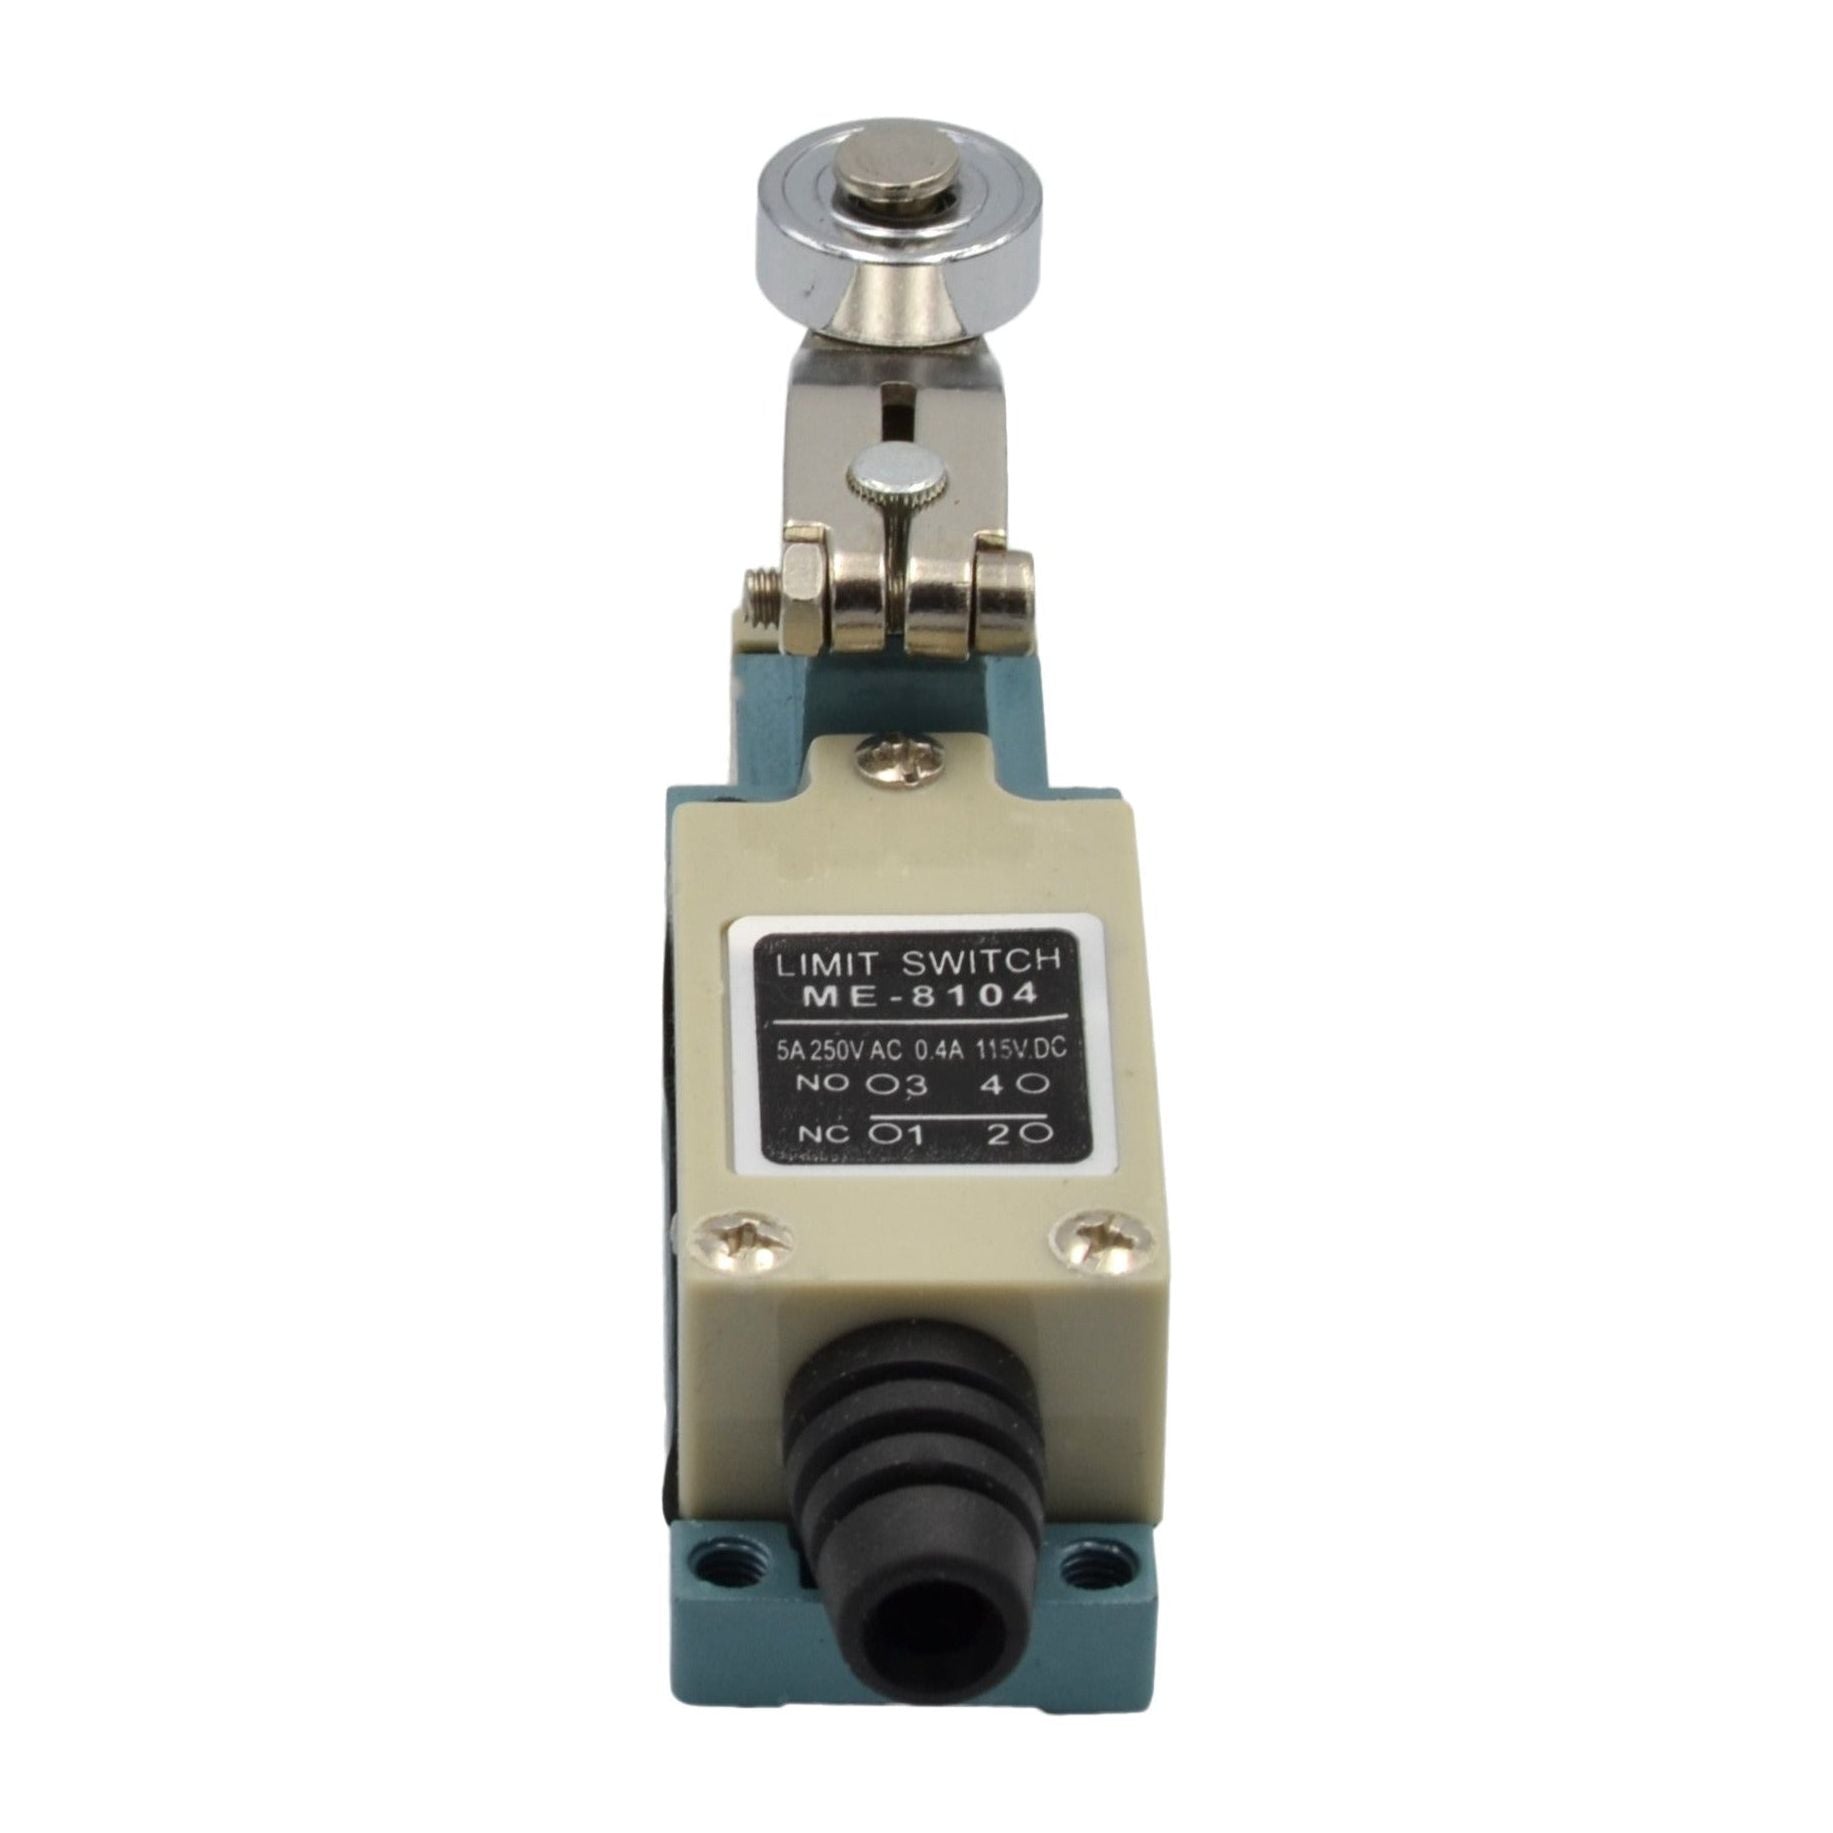 ME-8104 Micro Limit Switch with Adjustable Lever Roller Arm